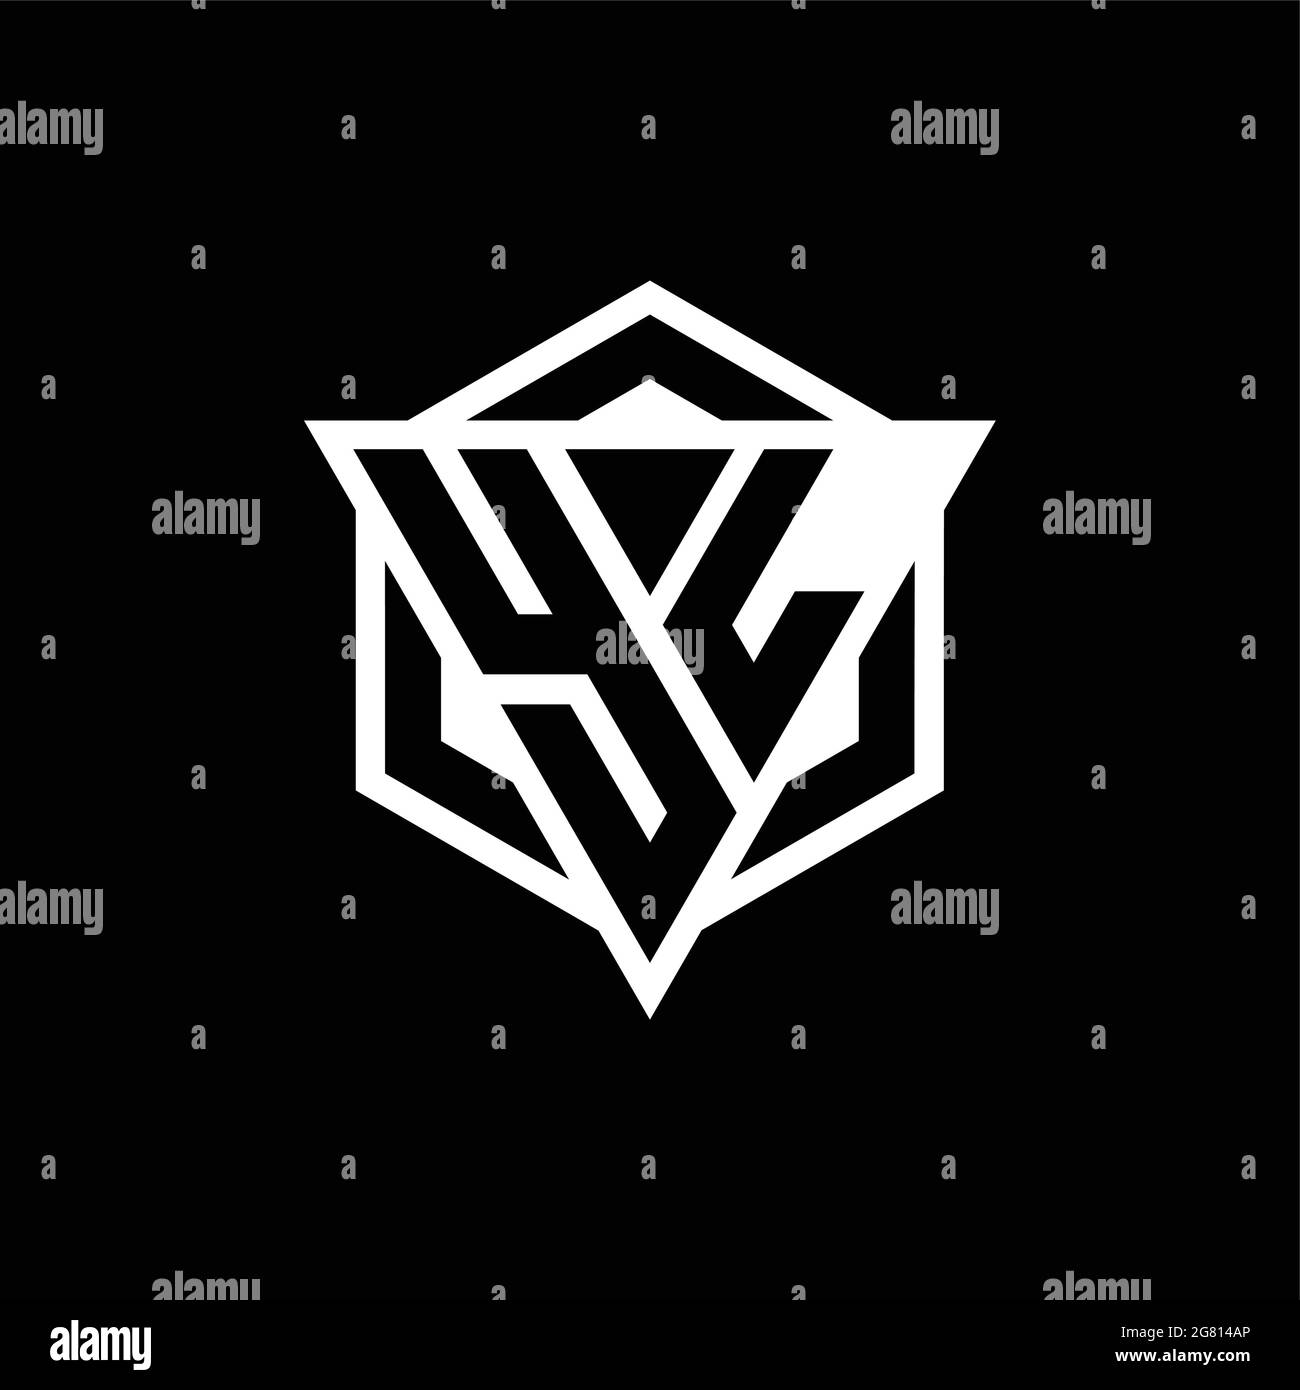 Yl logo monogram with triangle and hexagon modern Vector Image